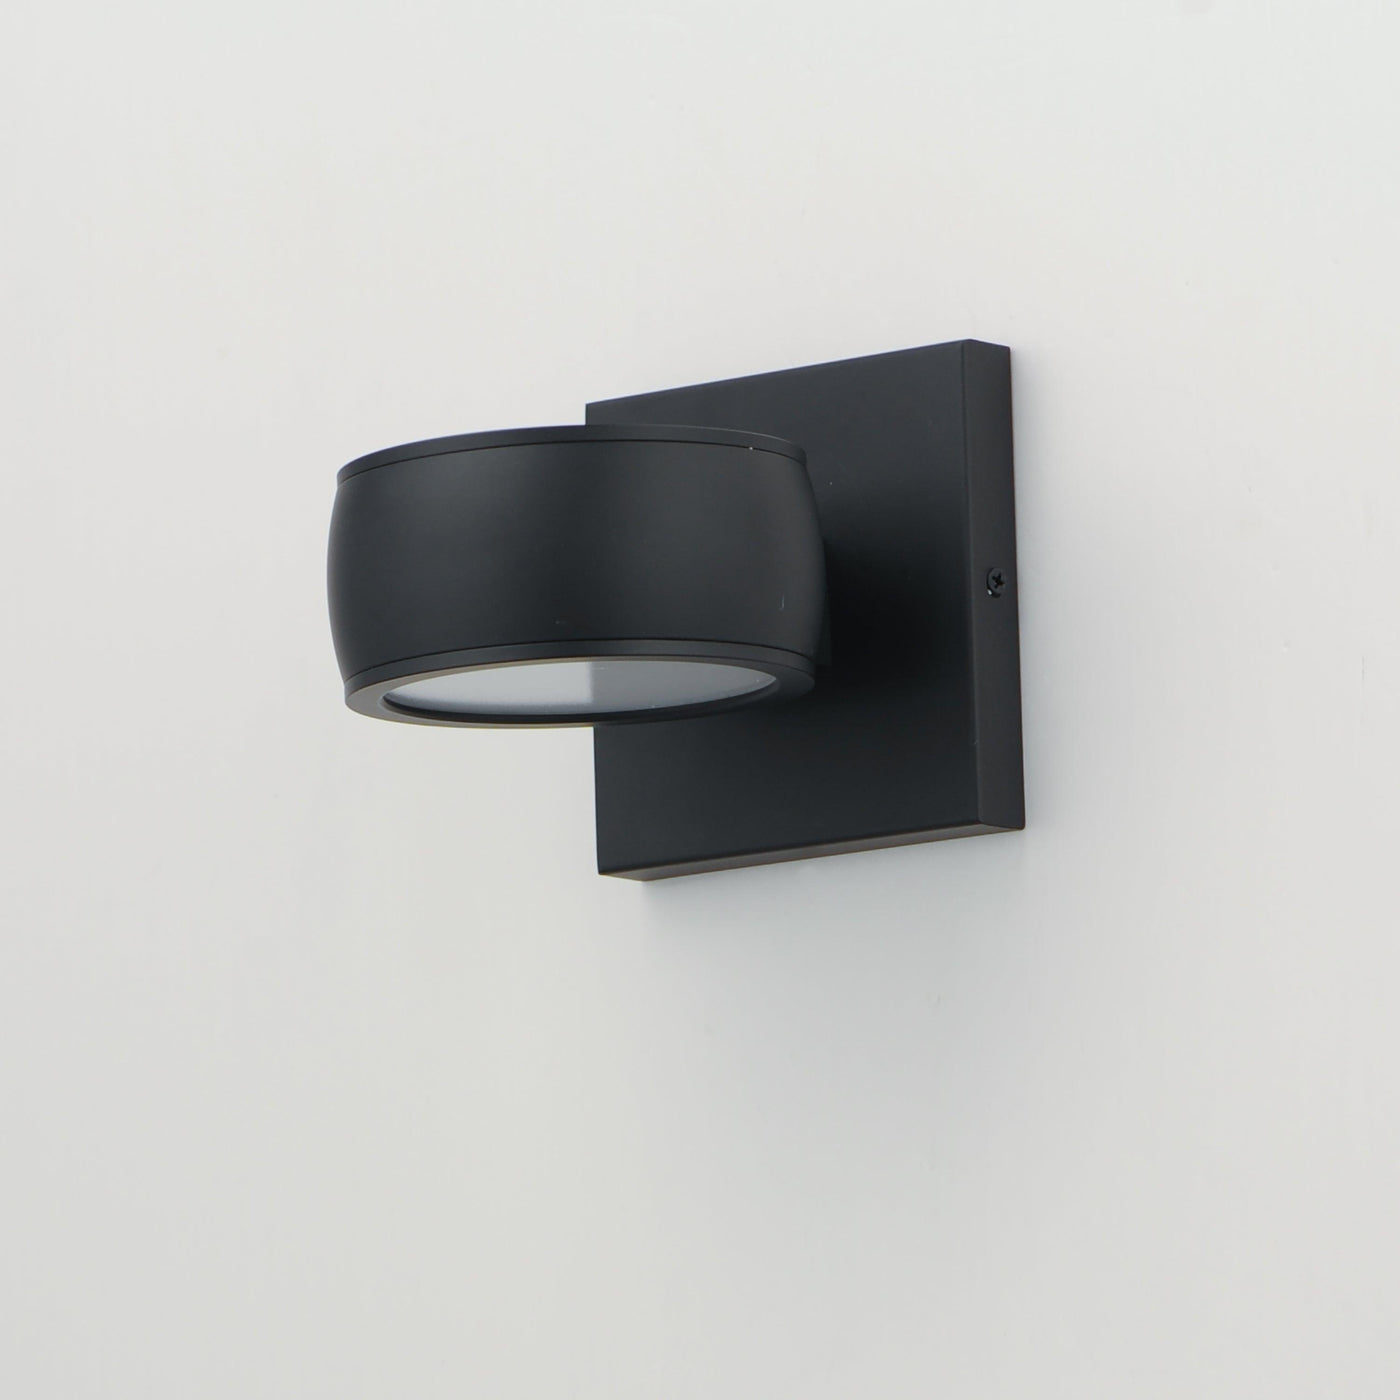 LED Black Aluminum Frame with Acrylic Lens Outdoor Wall Sconce - LV LIGHTING